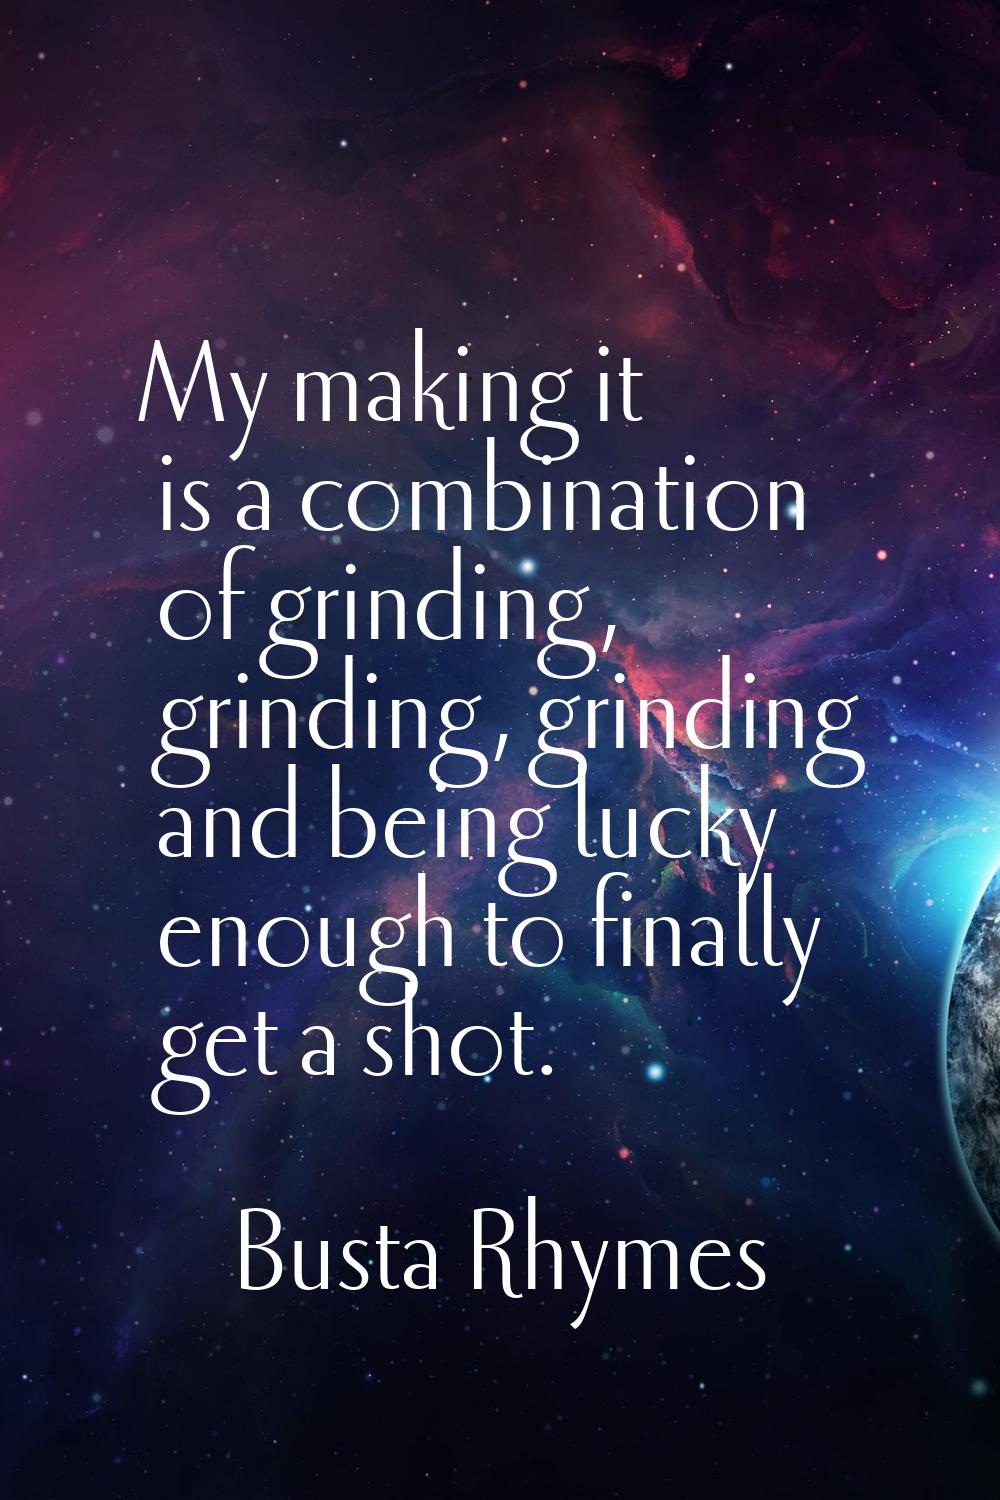 My making it is a combination of grinding, grinding, grinding and being lucky enough to finally get